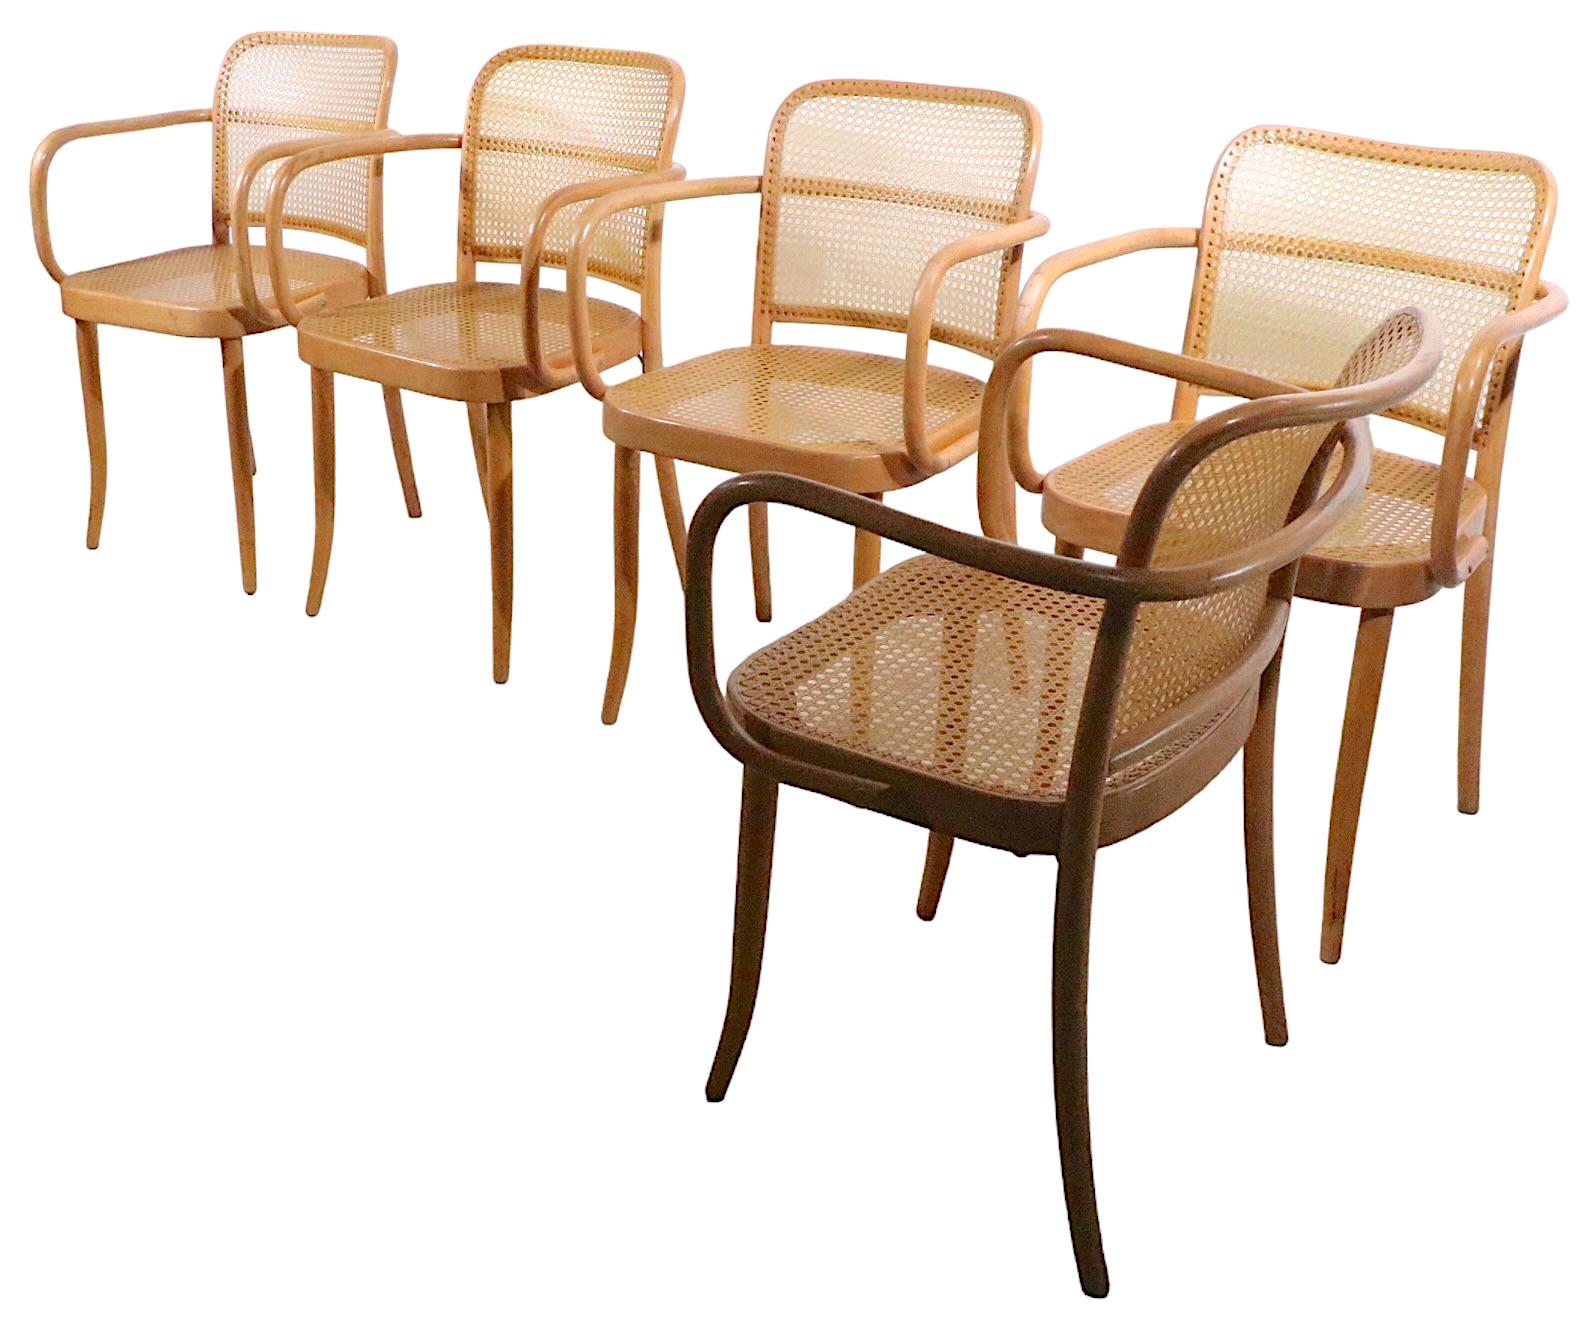 Vienna Secession Set of 5 Josef Frank Prague Chairs Made in Czechoslovakia, circa 1970s For Sale